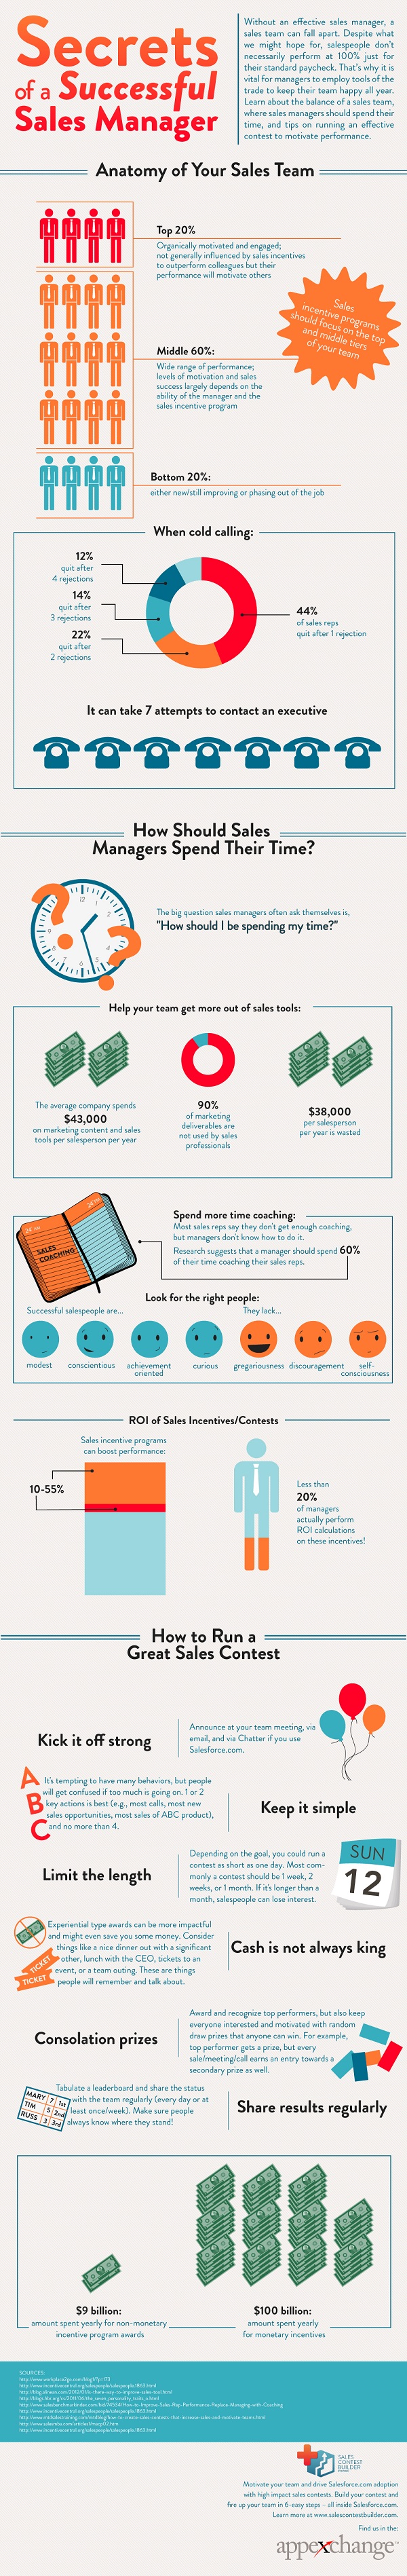 Secrets of a Successful Sales Manager - INFOGRAPHIC